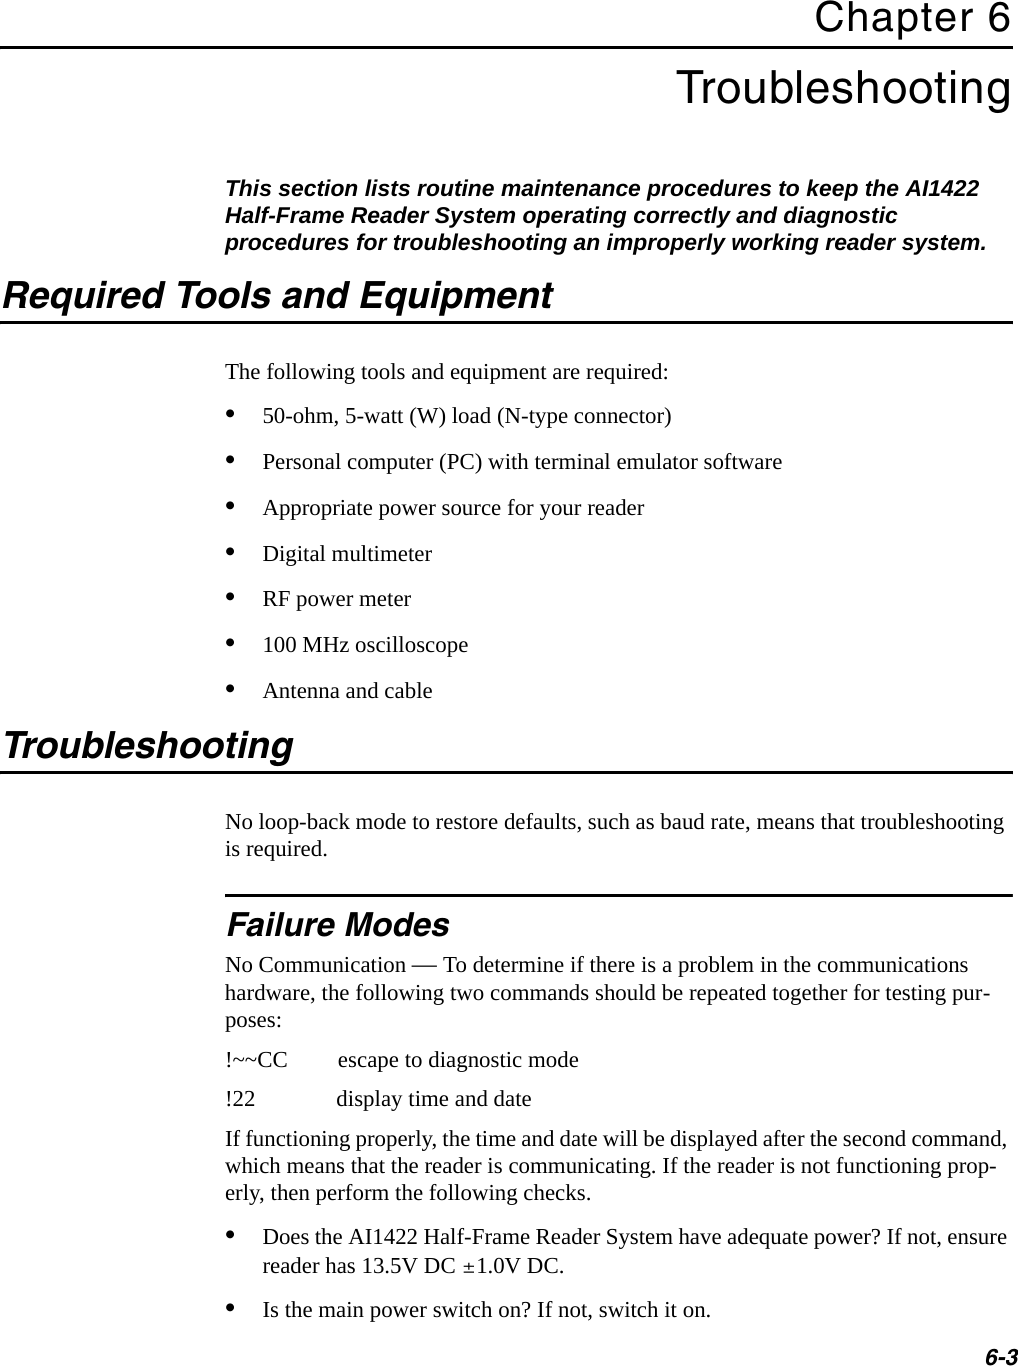 6-3Chapter 6TroubleshootingThis section lists routine maintenance procedures to keep the AI1422 Half-Frame Reader System operating correctly and diagnostic procedures for troubleshooting an improperly working reader system.Required Tools and EquipmentThe following tools and equipment are required:•50-ohm, 5-watt (W) load (N-type connector)•Personal computer (PC) with terminal emulator software•Appropriate power source for your reader•Digital multimeter•RF power meter•100 MHz oscilloscope•Antenna and cableTroubleshootingNo loop-back mode to restore defaults, such as baud rate, means that troubleshooting is required.Failure ModesNo Communication — To determine if there is a problem in the communications hardware, the following two commands should be repeated together for testing pur-poses:!~~CC escape to diagnostic mode!22 display time and dateIf functioning properly, the time and date will be displayed after the second command, which means that the reader is communicating. If the reader is not functioning prop-erly, then perform the following checks.•Does the AI1422 Half-Frame Reader System have adequate power? If not, ensure reader has 13.5V DC ±1.0V DC.•Is the main power switch on? If not, switch it on.